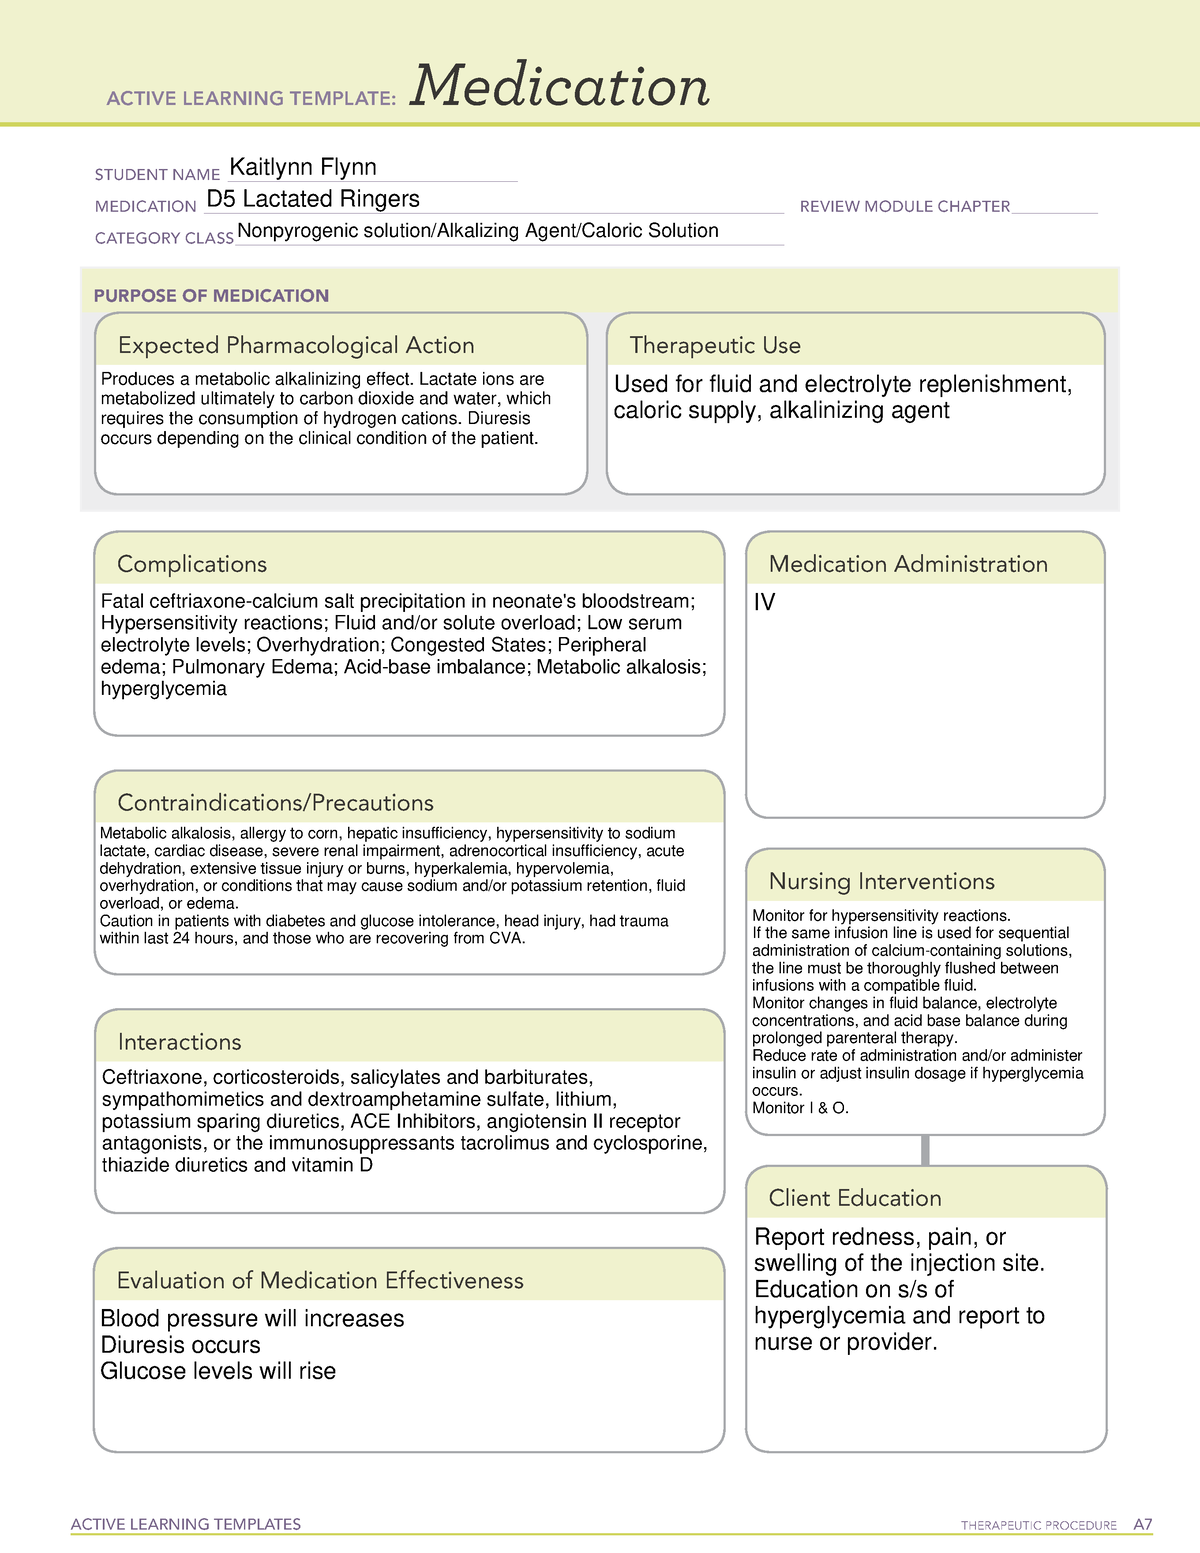 medication-d5-lactated-ringers-active-learning-templates